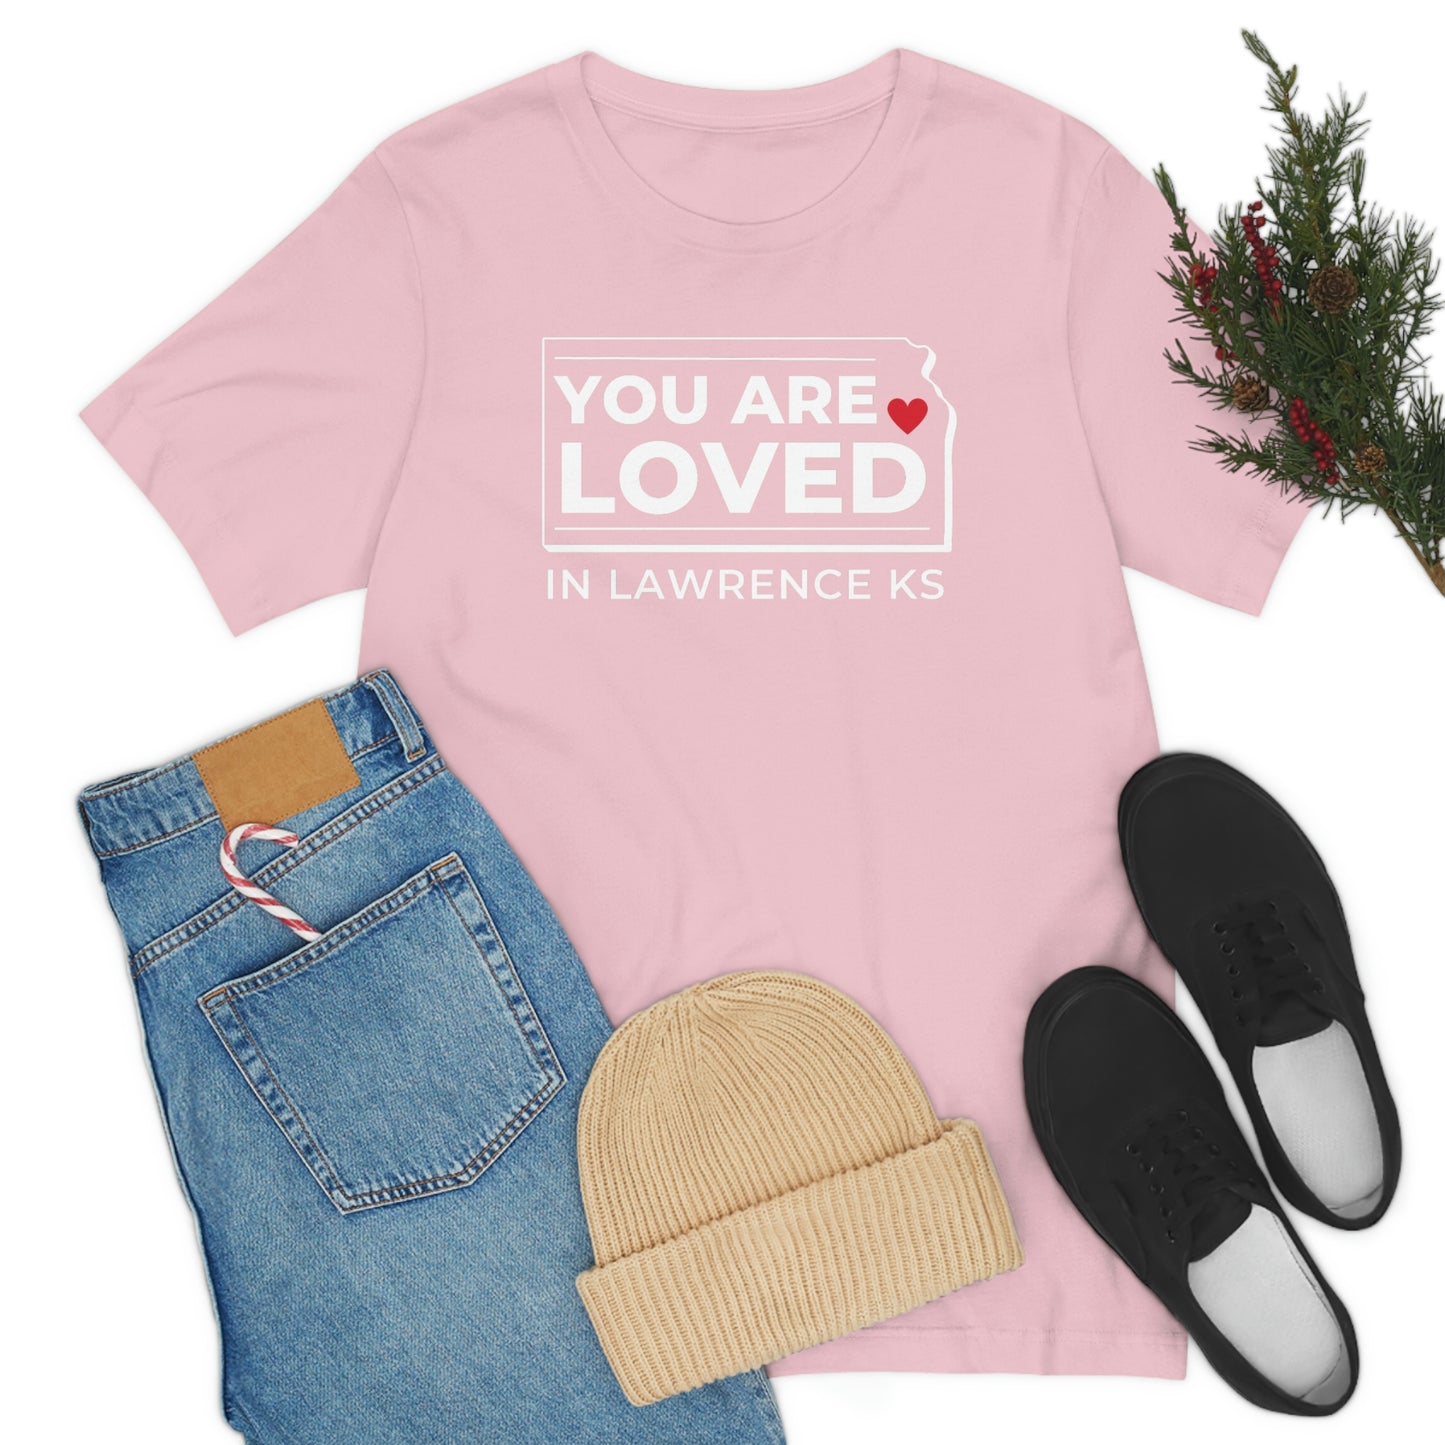 "YOU ARE LOVED ❤️ in Lawrence KS" T-Shirt  [PINK]